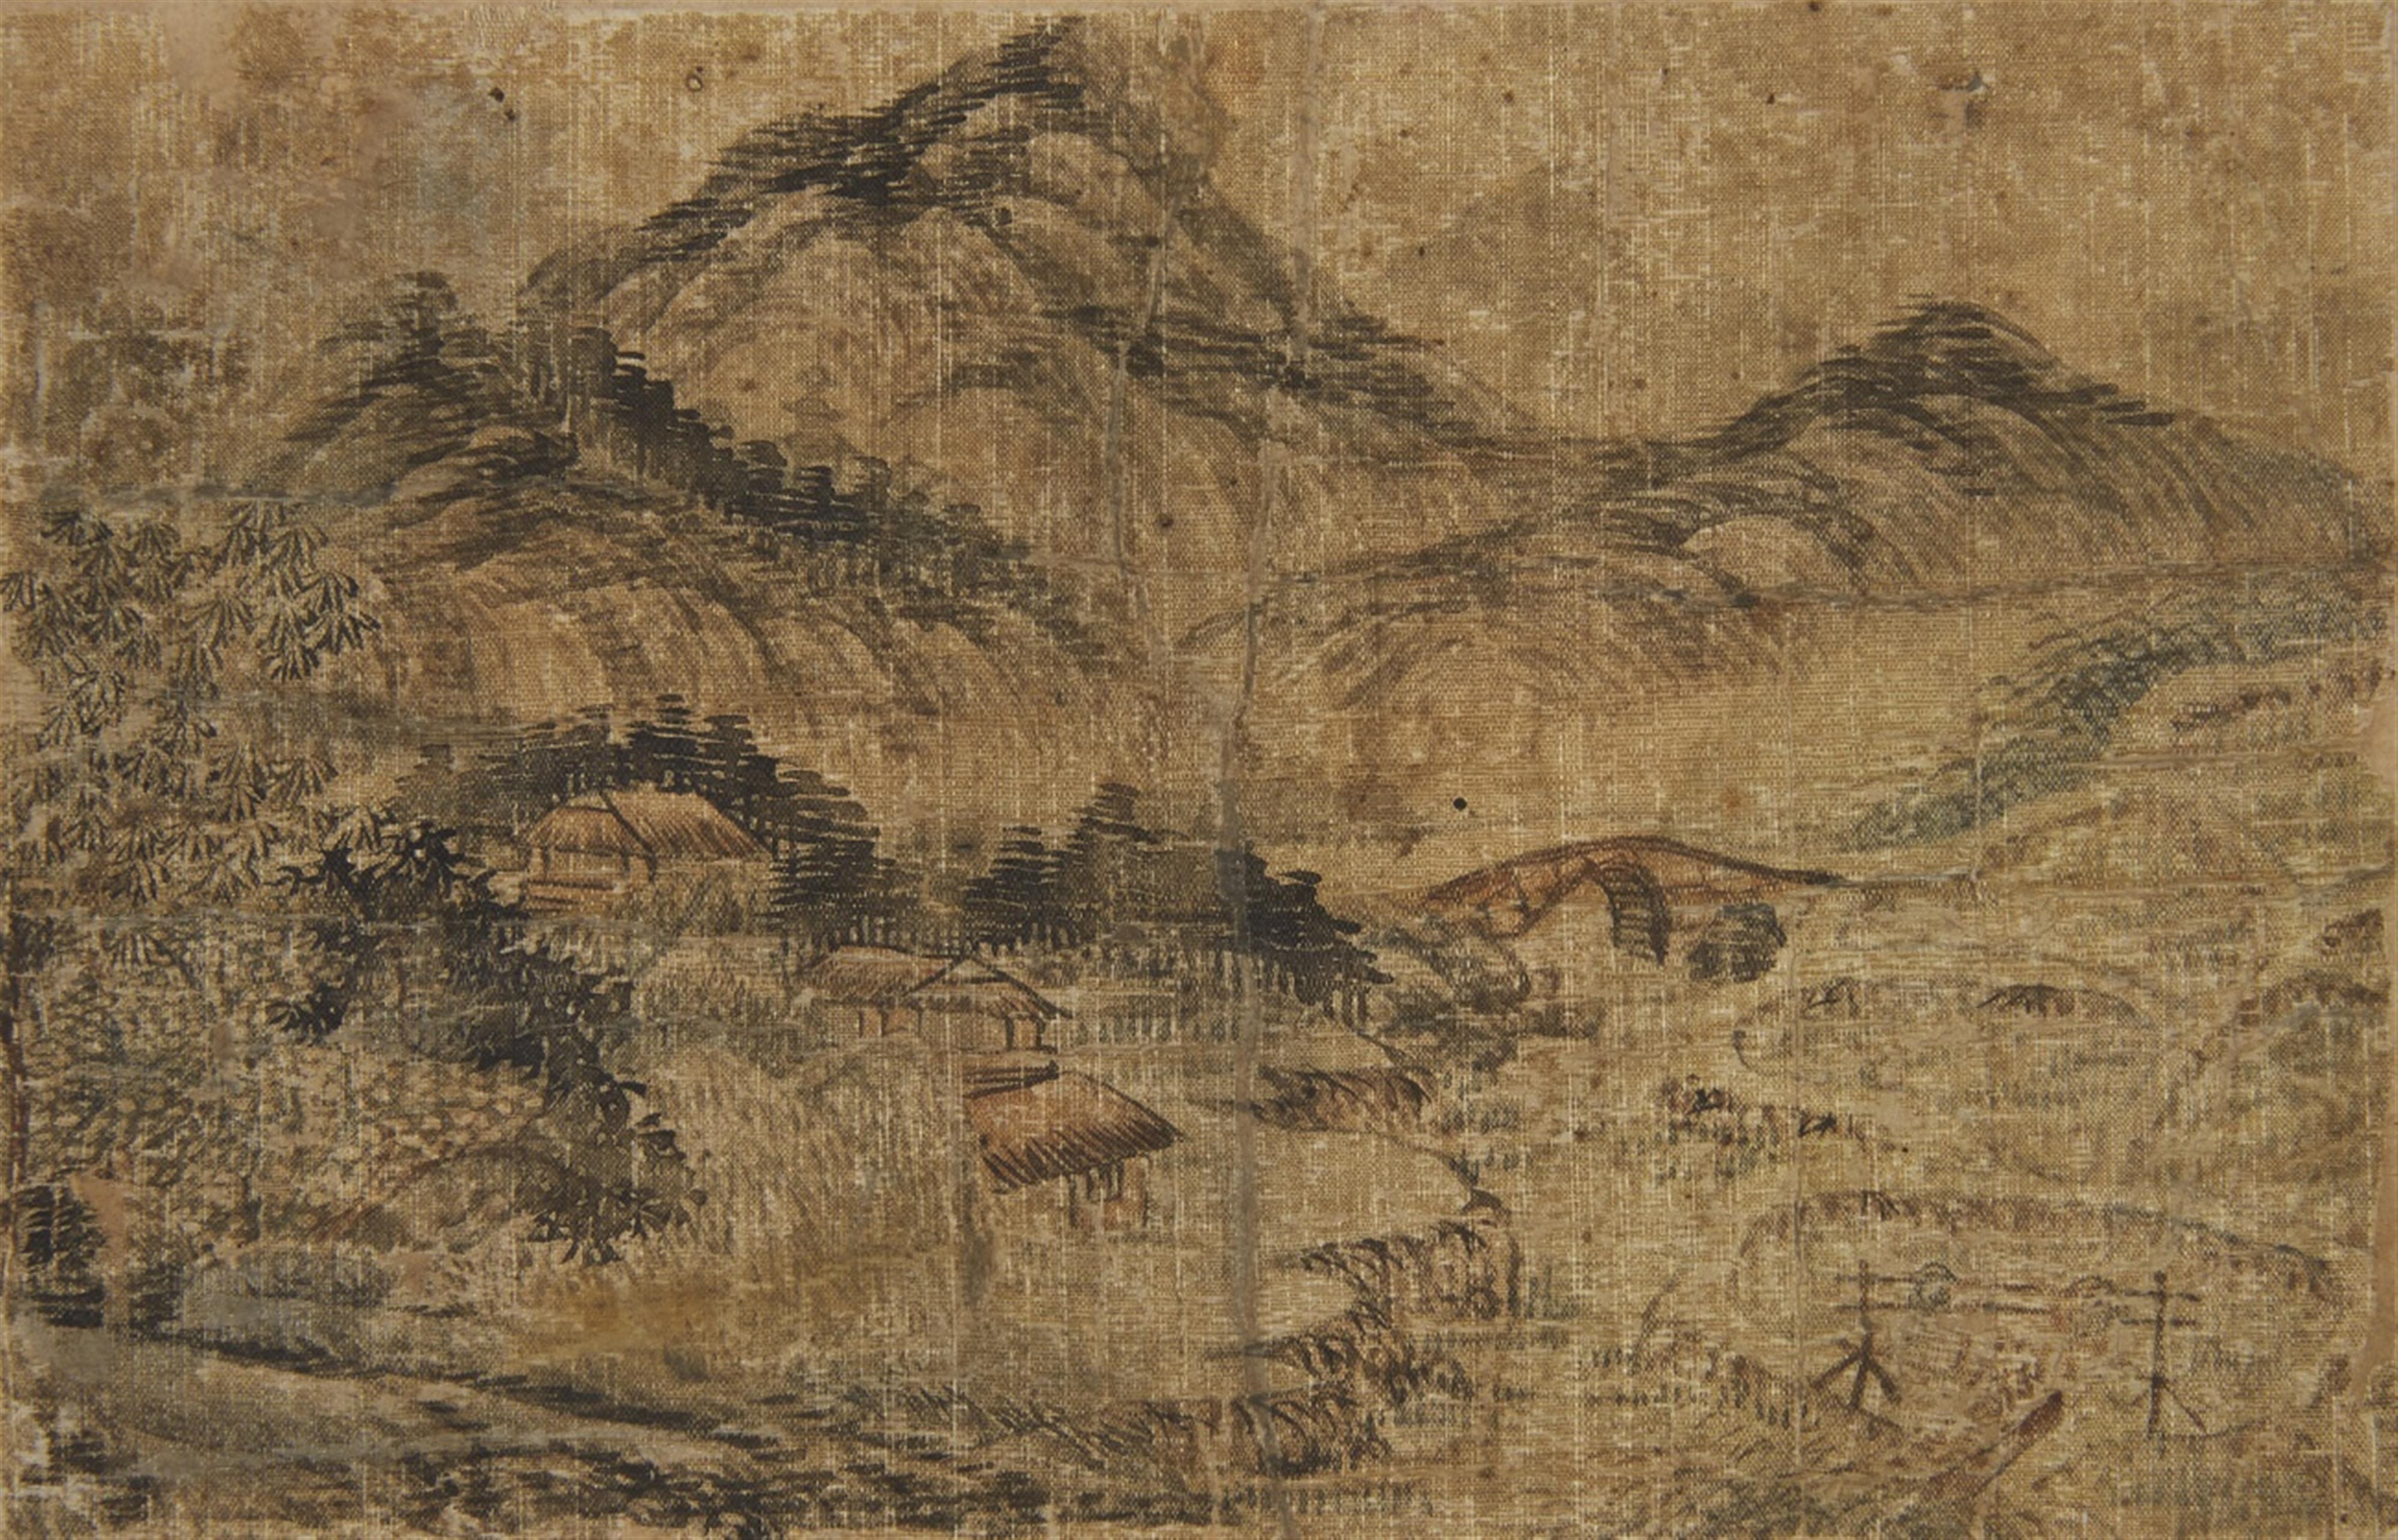 Qian Gu, in the manner of - An album titled "Ming Qian Gu shanshui ce" with six double-leaves, depicting landscapes in the manner of Qian Gu (1508-1578). Water damages. Cloth-covered covers. - image-6